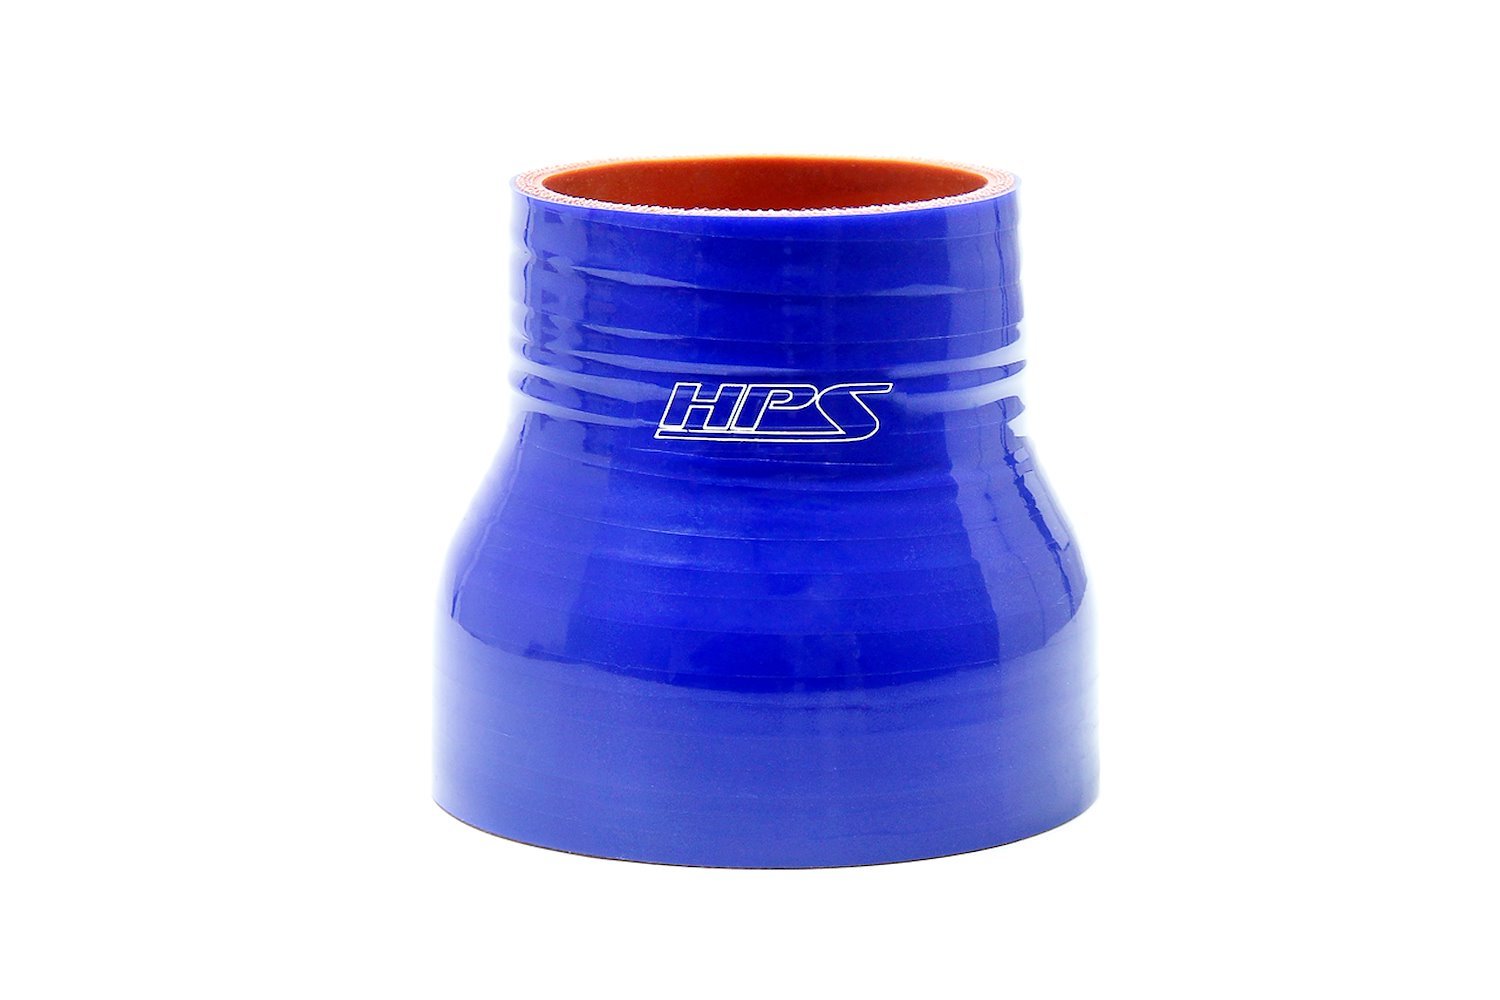 HTSR-300-450-L4-BLUE Silicone Reducer Hose, High-Temp 4-Ply Reinforced, 3 in. - 4-1/2 in. ID, 4 in. Long, Blue